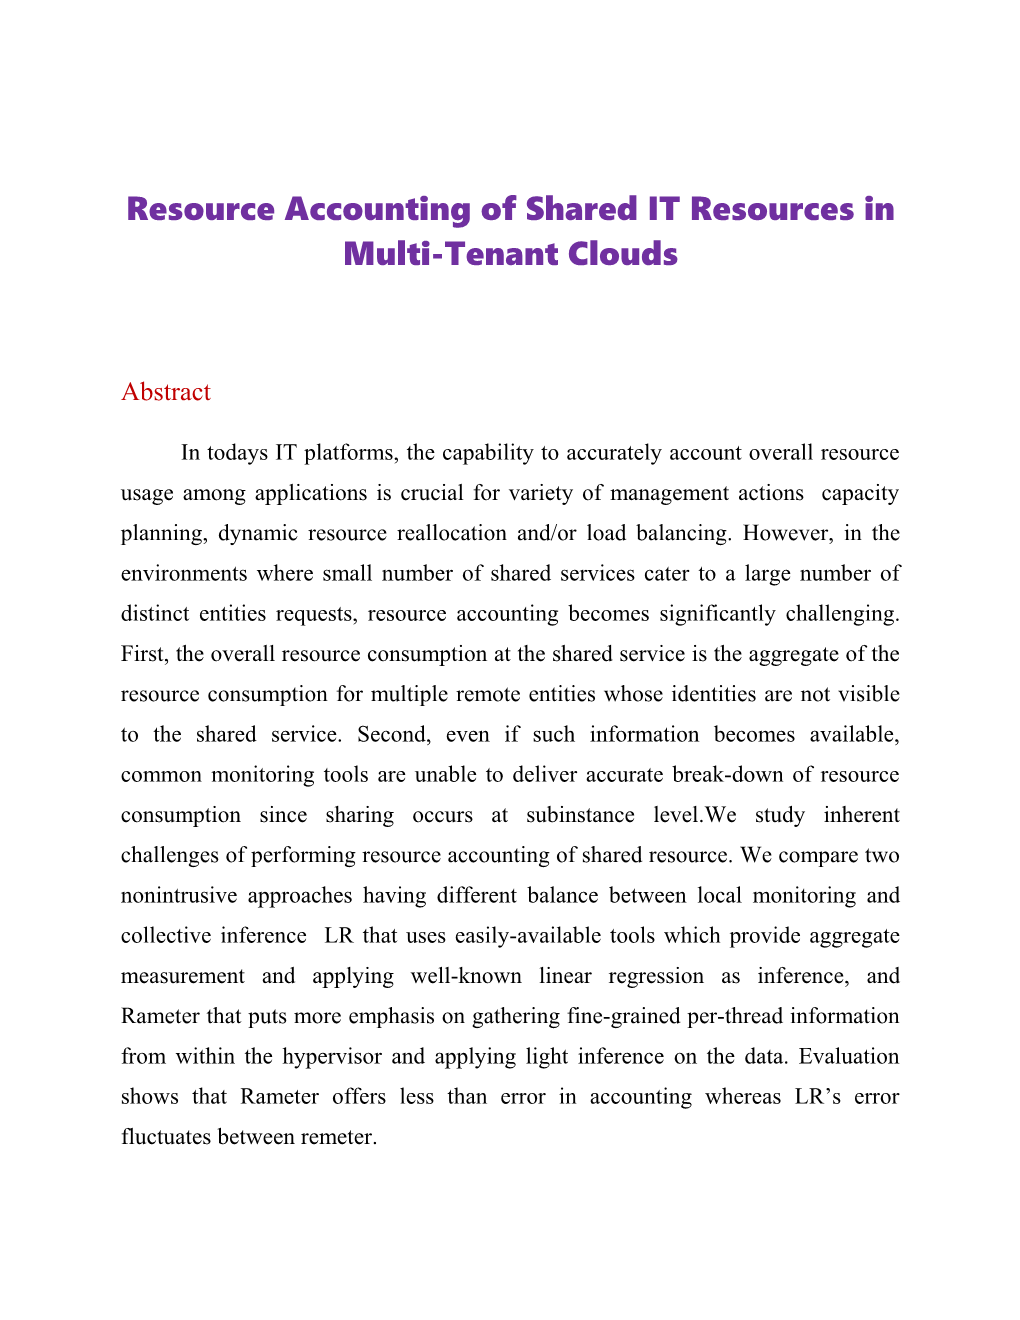 Resource Accounting of Shared IT Resources In